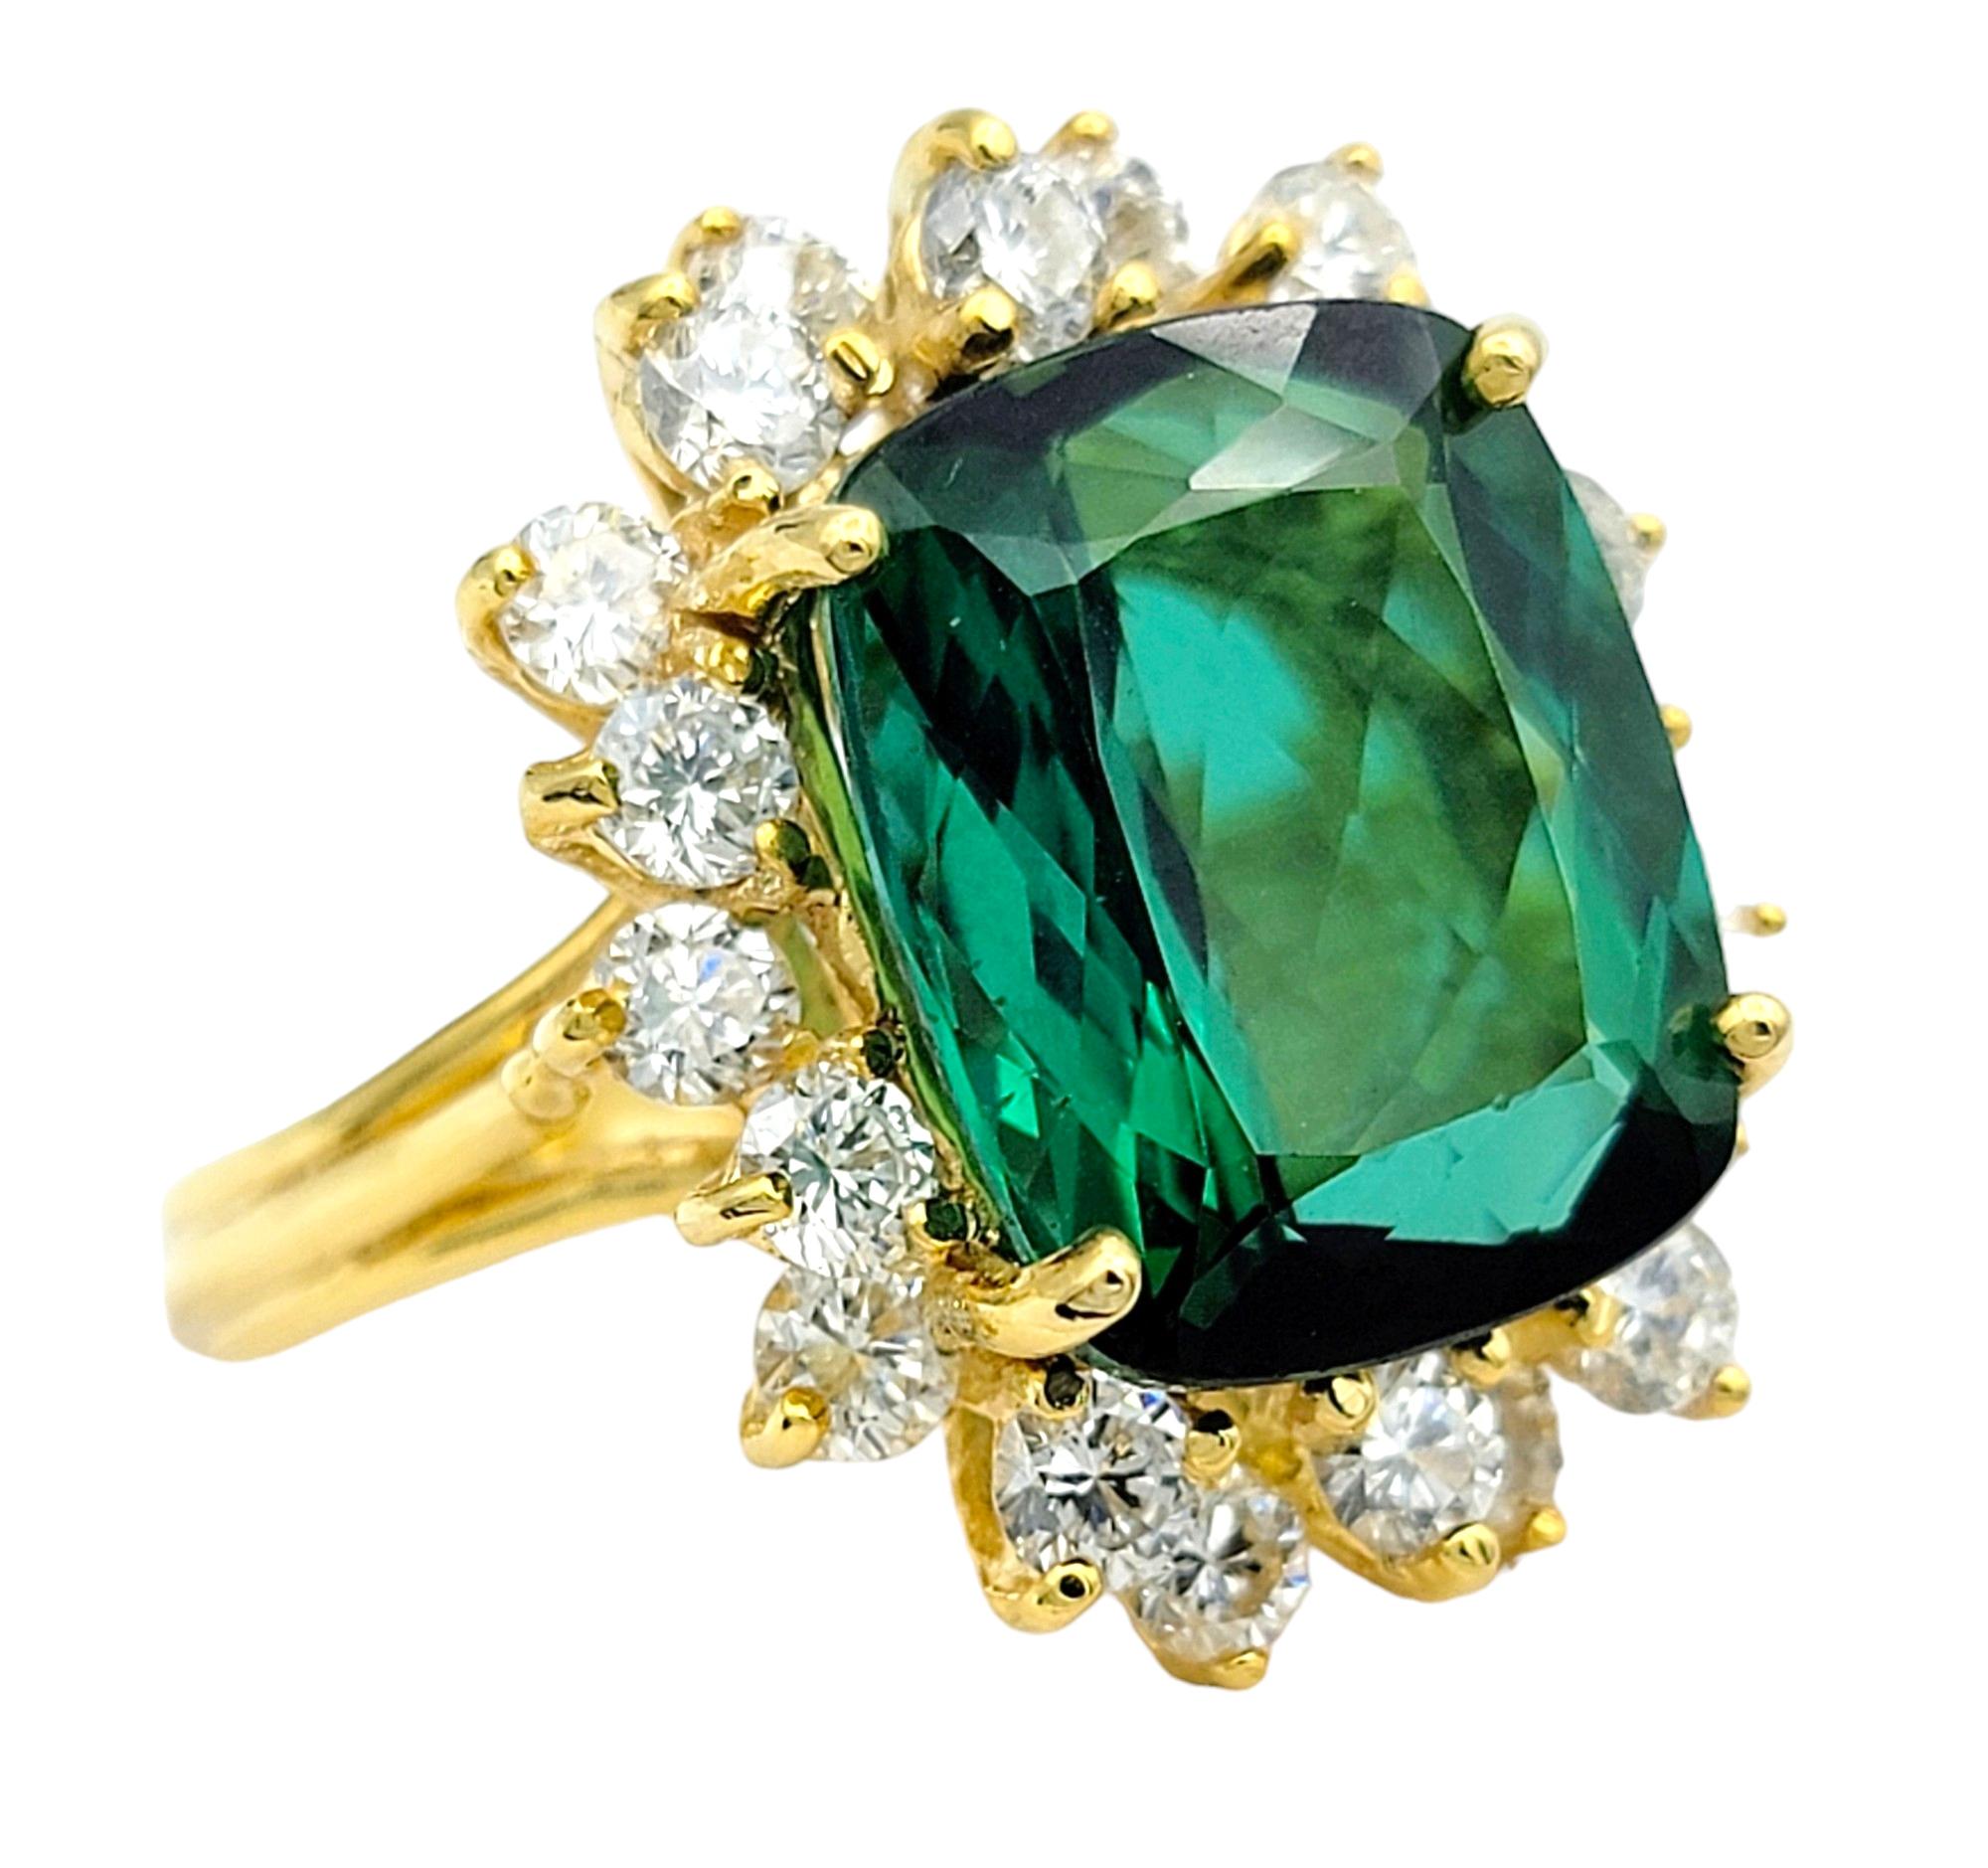 Ring Size: 6.5

This stunning ring showcases a vibrant cushion-cut green tourmaline as its centerpiece, radiating with natural beauty and allure. Surrounding the tourmaline is a dazzling halo of sparkling diamonds, enhancing its brilliance and